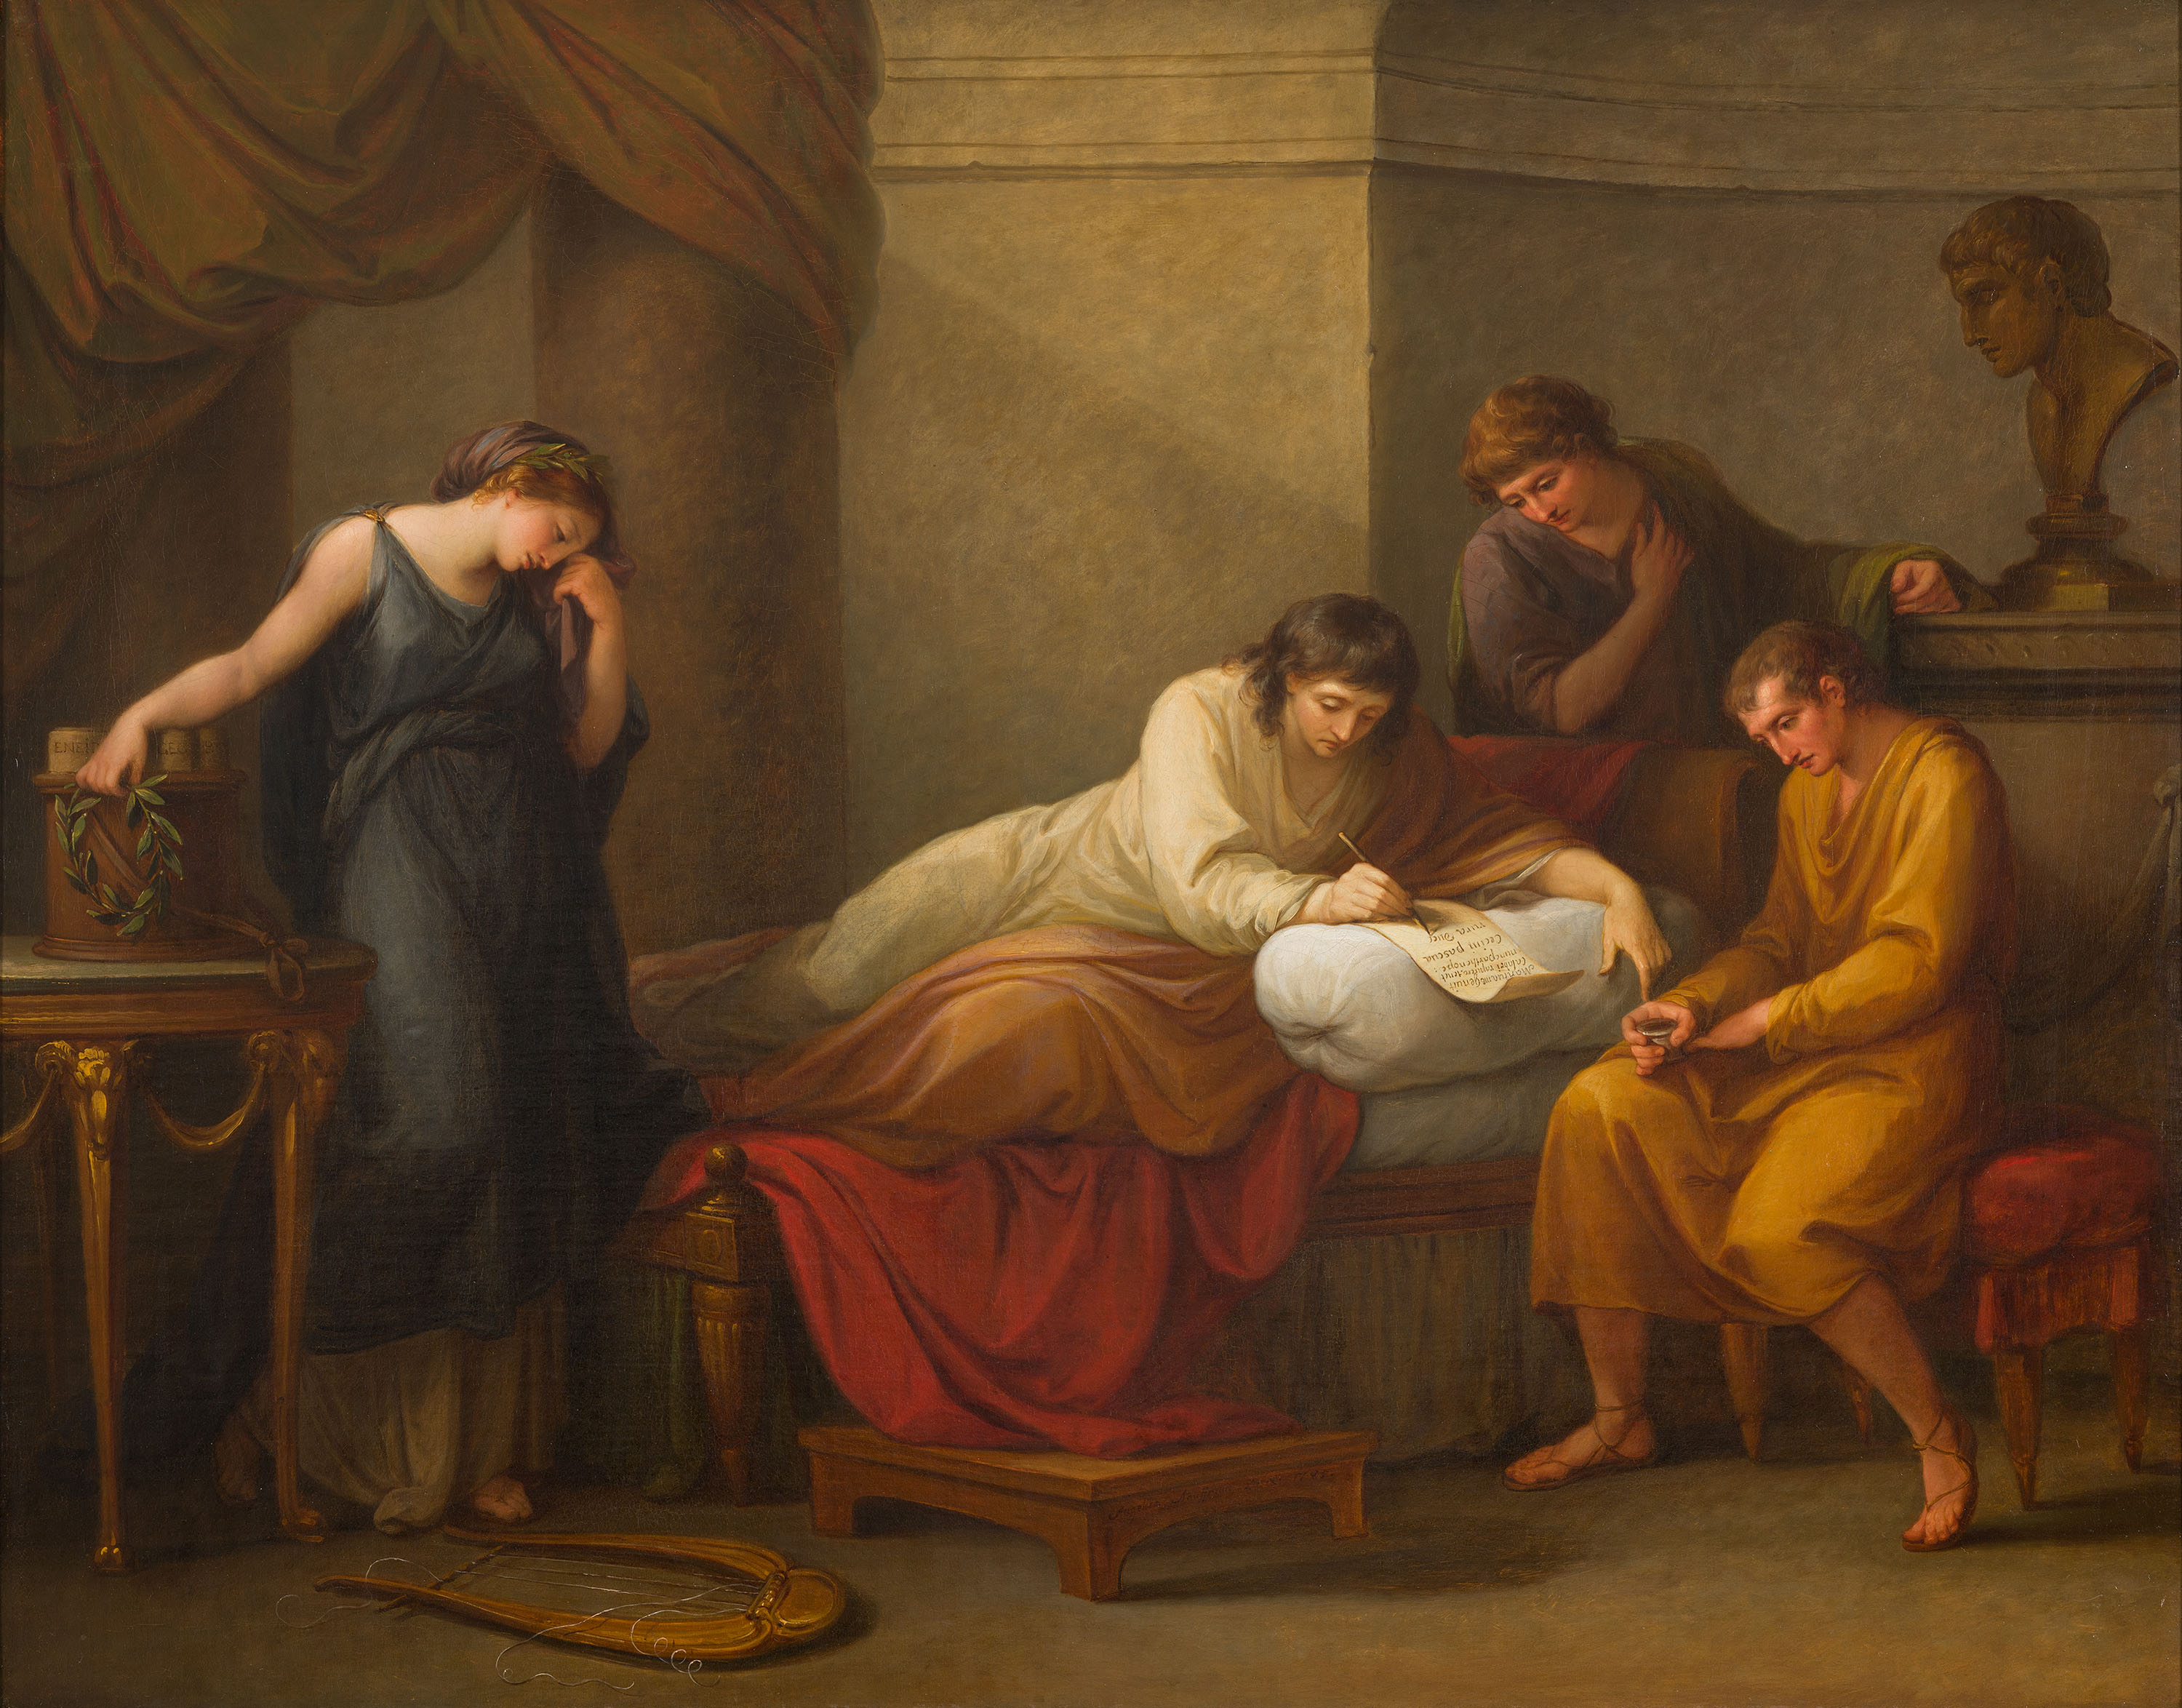 Angelica Kauffmann (Swiss, 1740–1807), Virgil Writing his Epitaph at Brundisi, 1785, oil on canvas